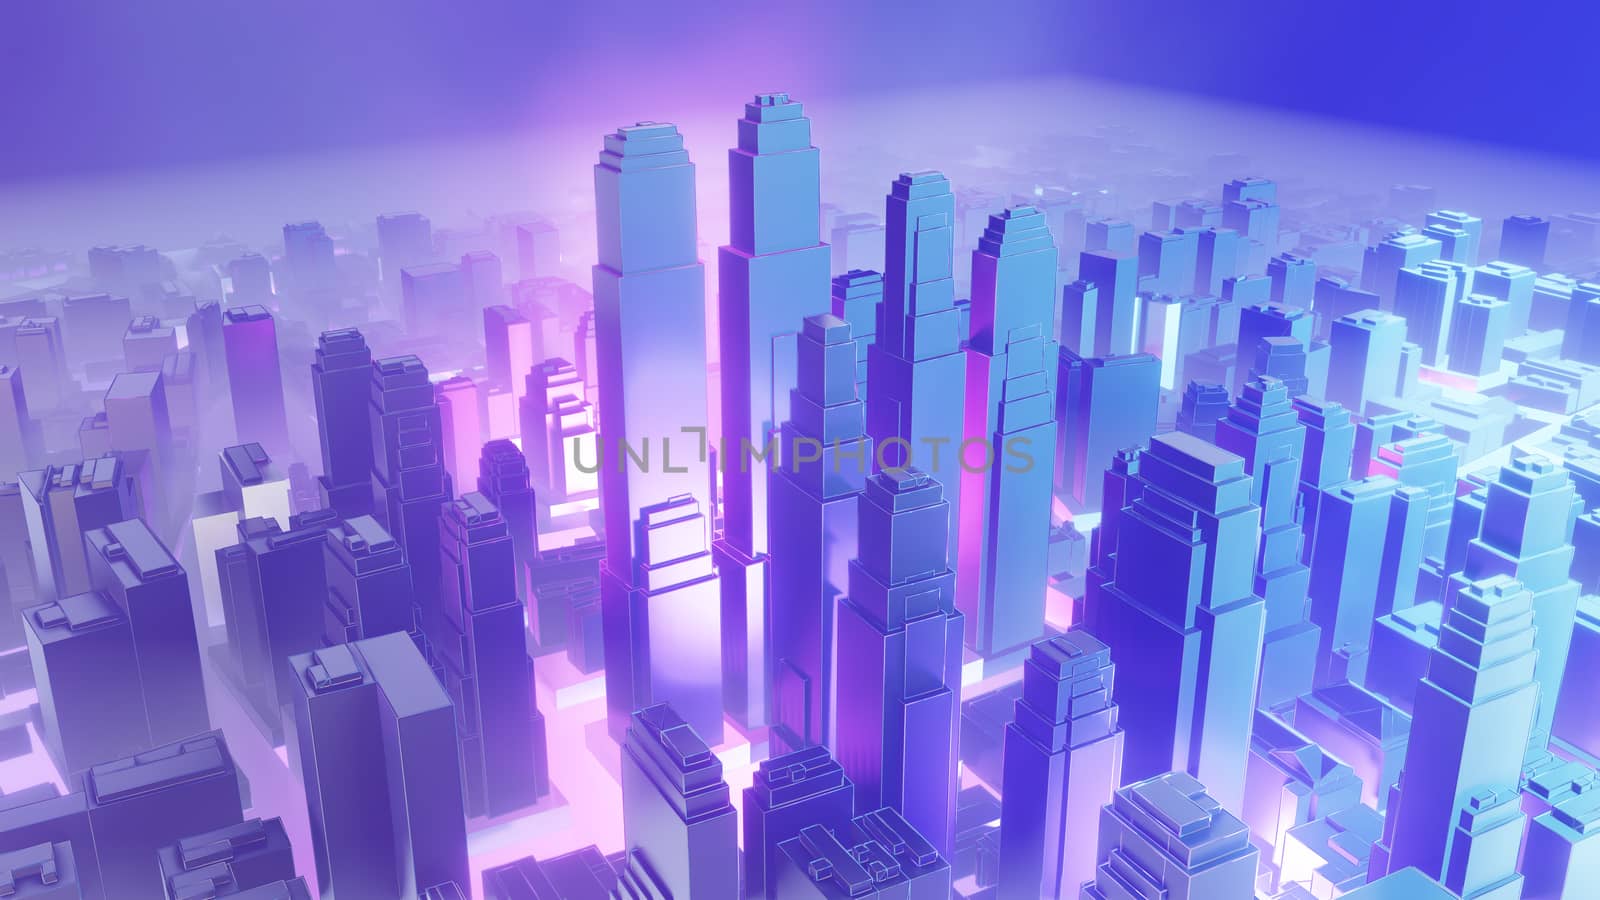 City in fog. Atmospheric emissions or explosion. 3D illustration. Concept of air pollution or military action